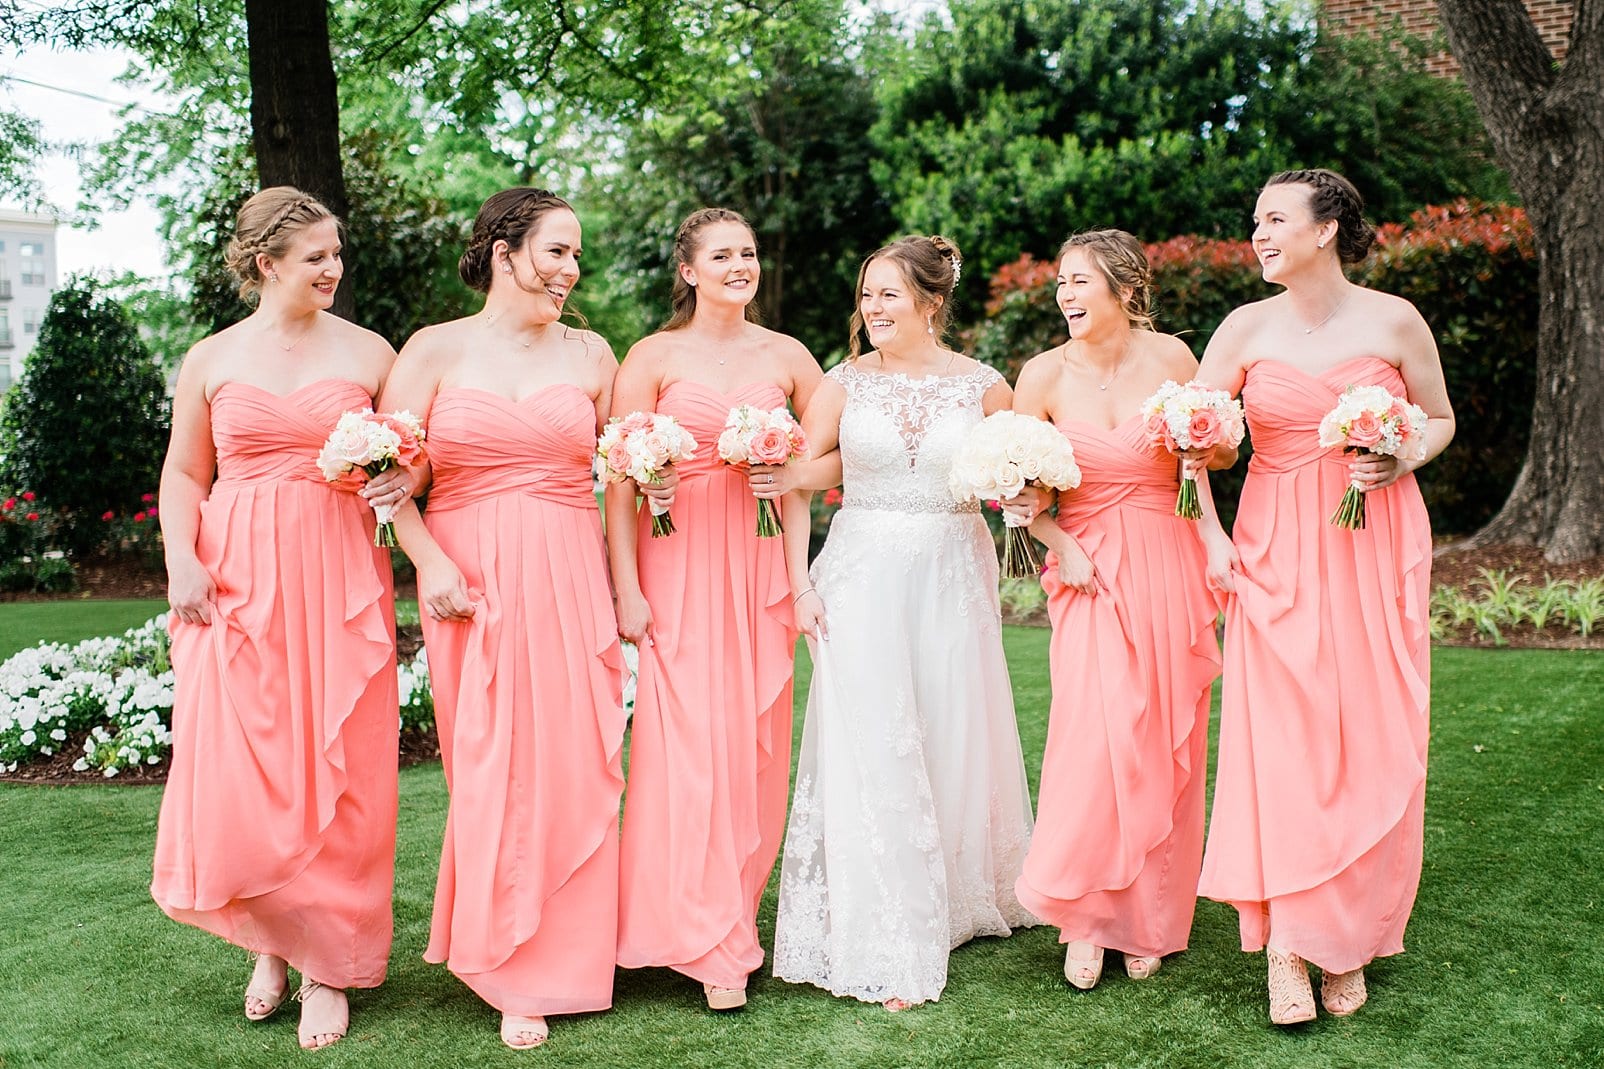 merrimon wynne bridal party walking in pink dresses photo 